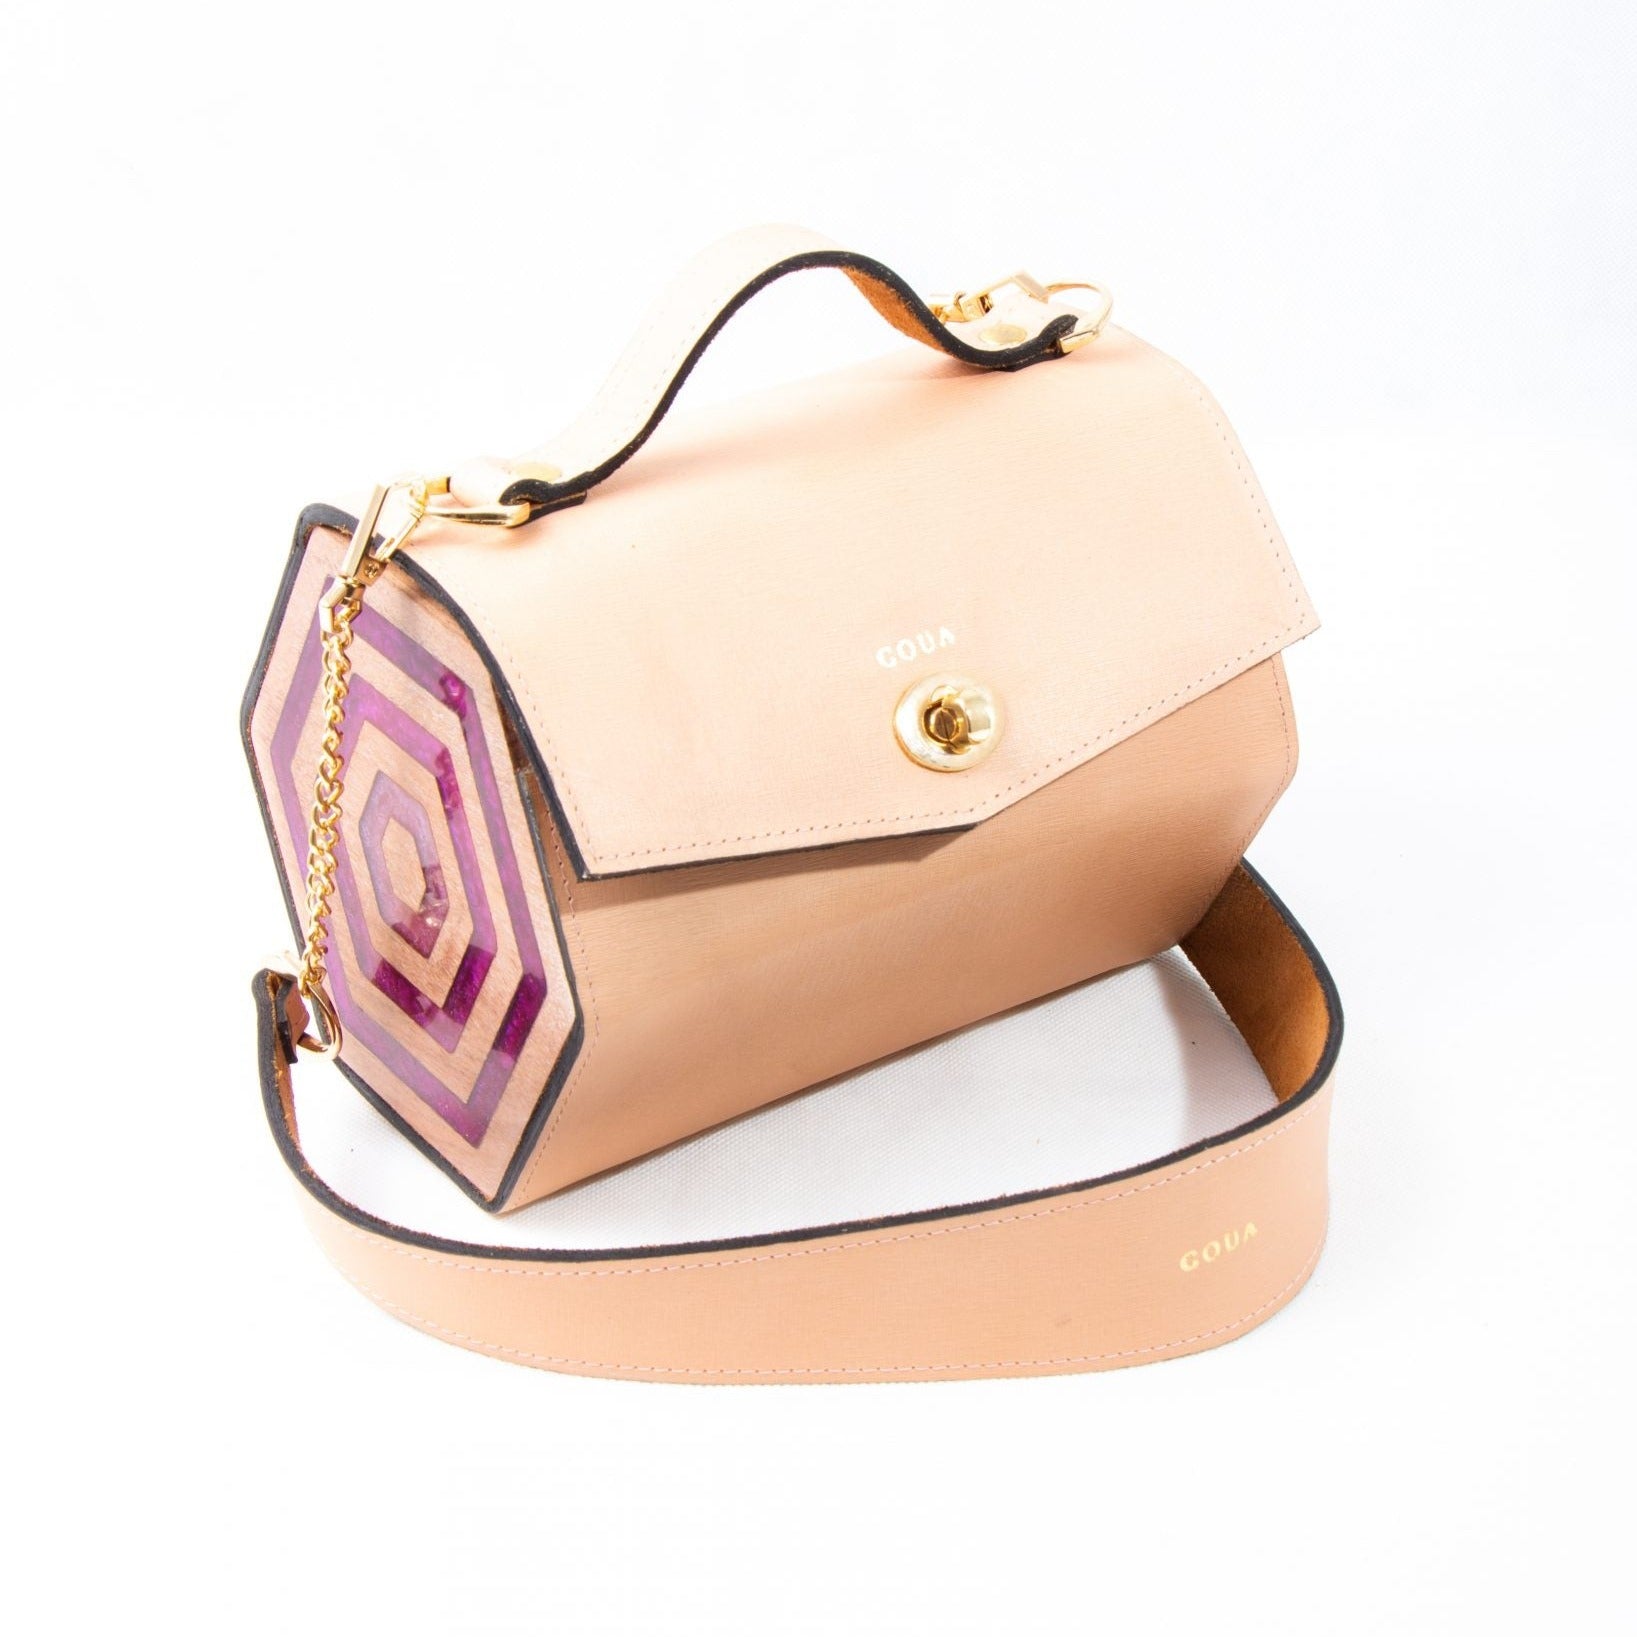 Pink handbag with hexagonal faces in genuine leather and mahogany wood